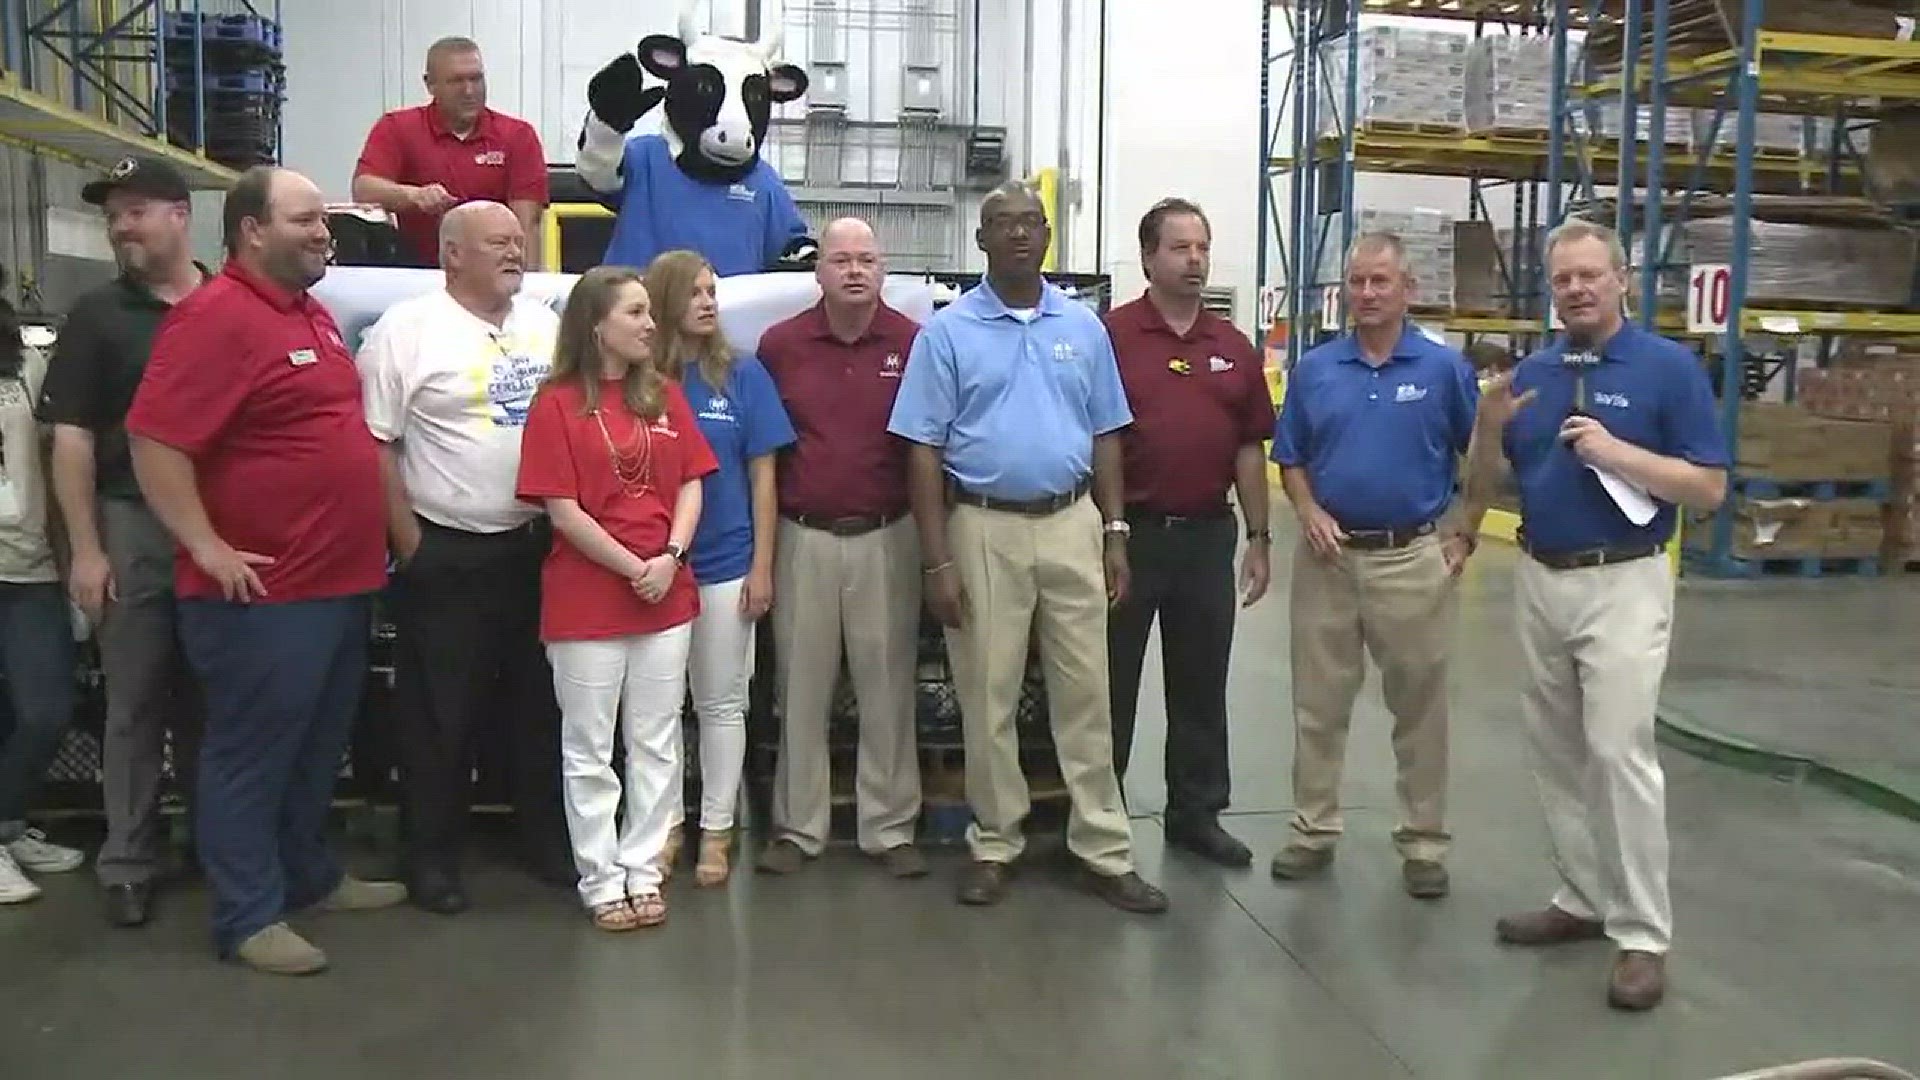 THV11's Tom Brannon was live at the Arkansas Foodbank to wrap up the 2017 THV11 Summer Cereal Drive